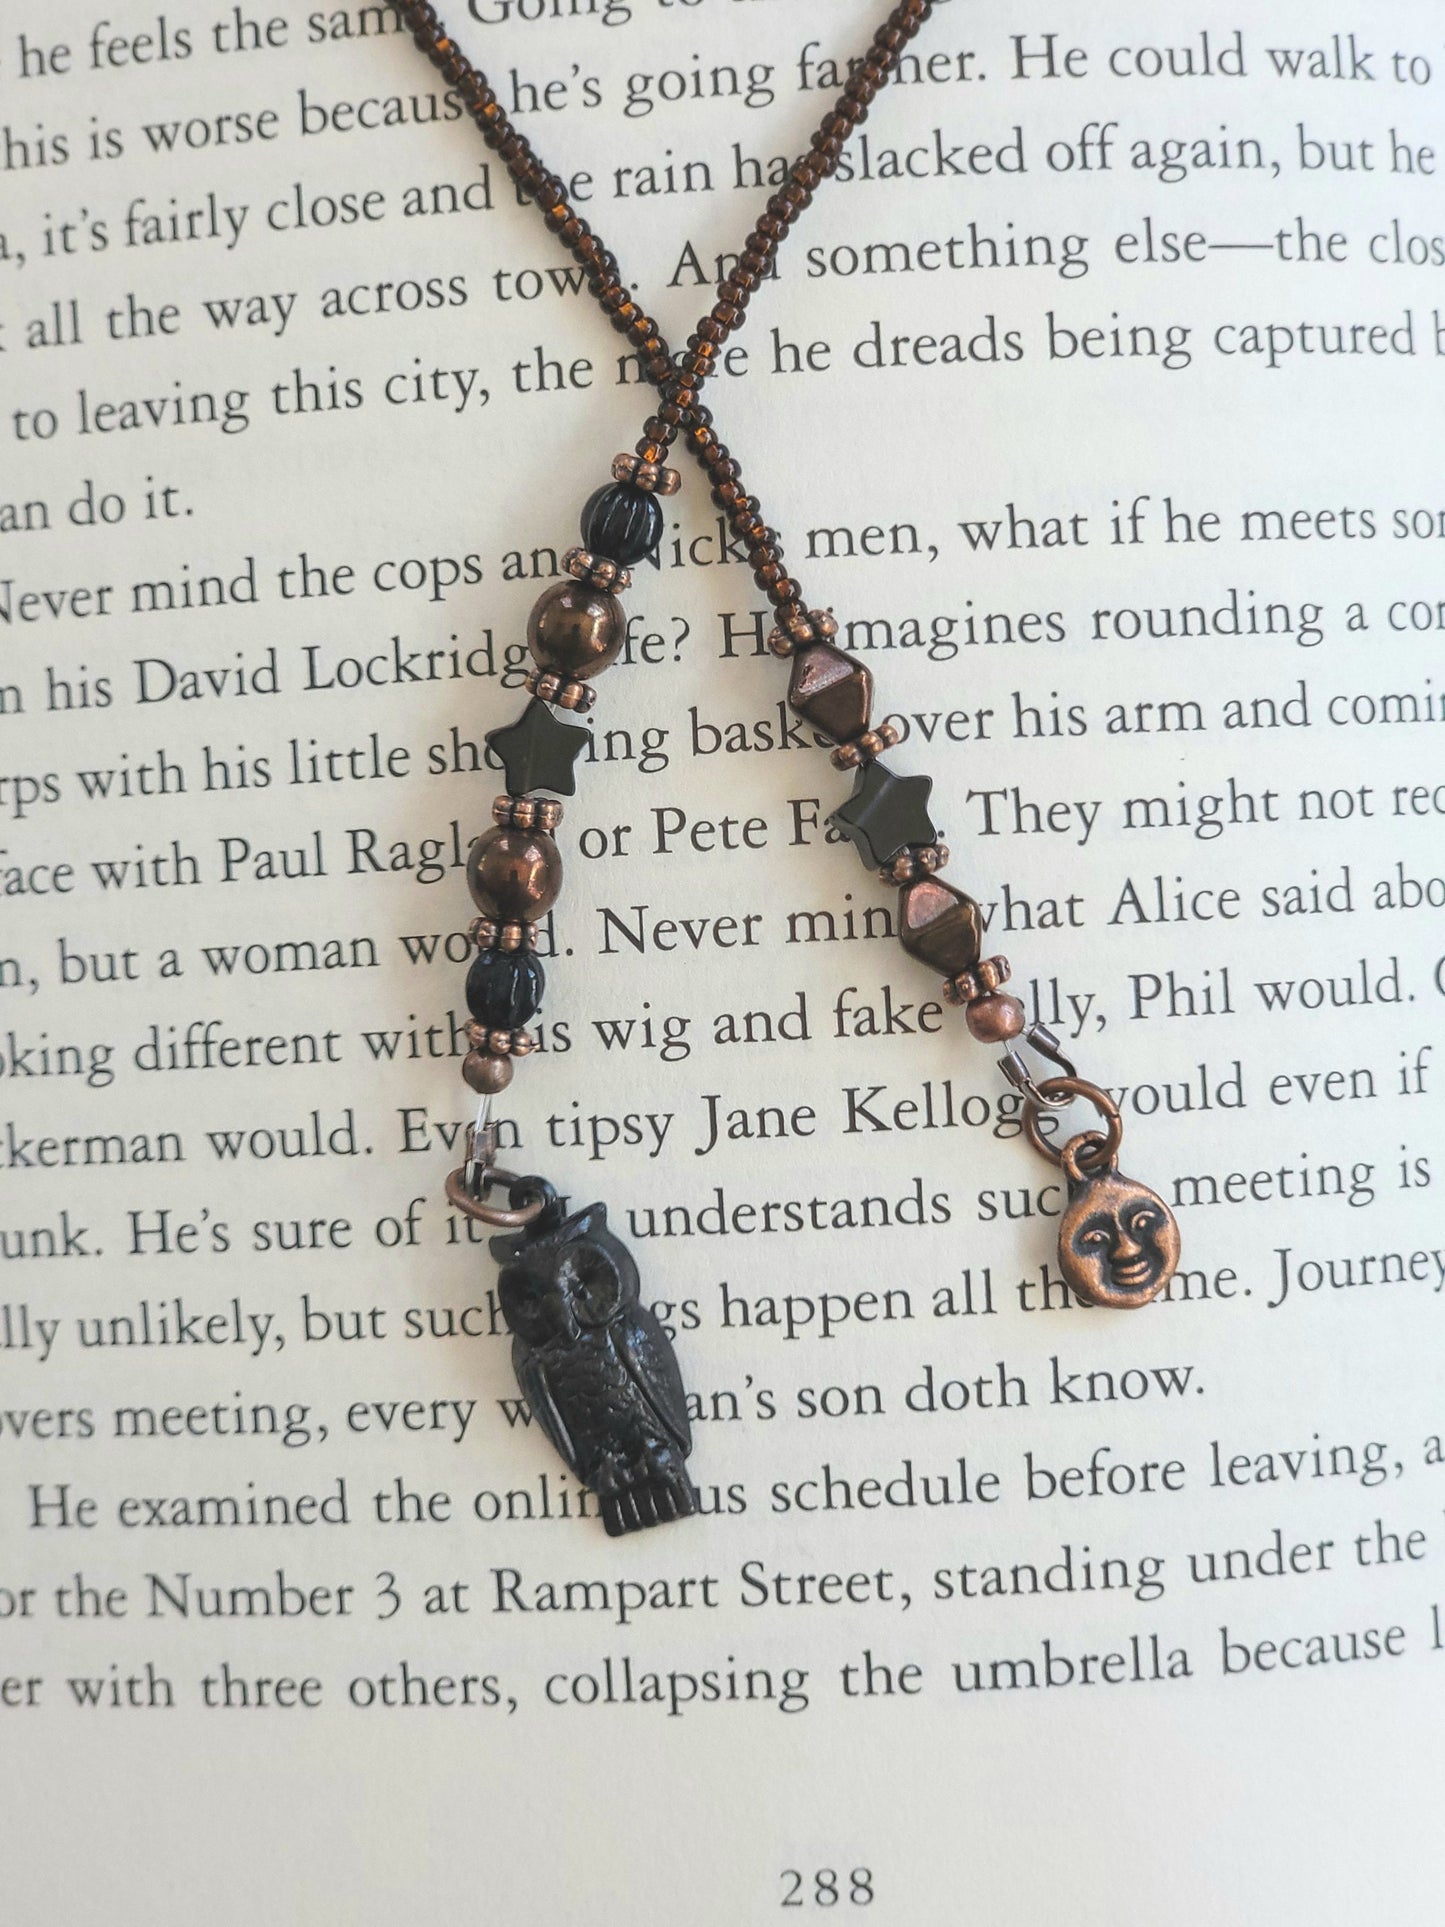 Add a Touch of Magic to Your Reading: Beaded Bookmark with Black Owl Charm and Tiny Obsidian Star Beads